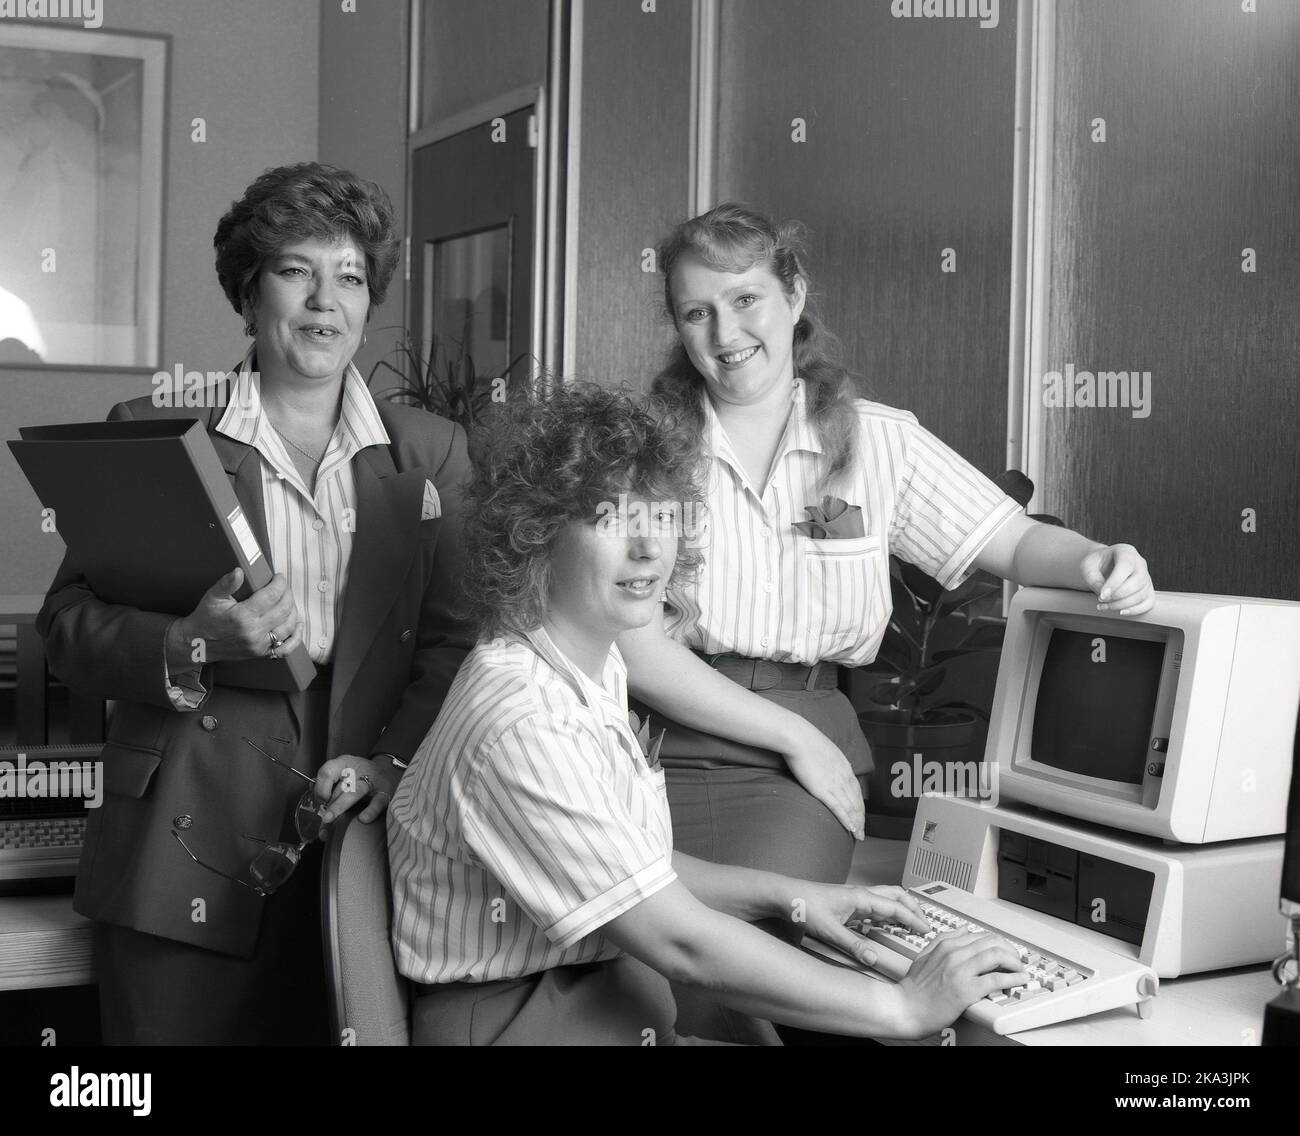 1989, historical, three office female staff by a computer of the era, England, UK. Manager in jacket behind, with folder, labeled 'House Rules'. One of the women is sitting at a keyboard infront of an IBM personal computer of the era, consisting of a separate display monitor and computer. Stock Photo